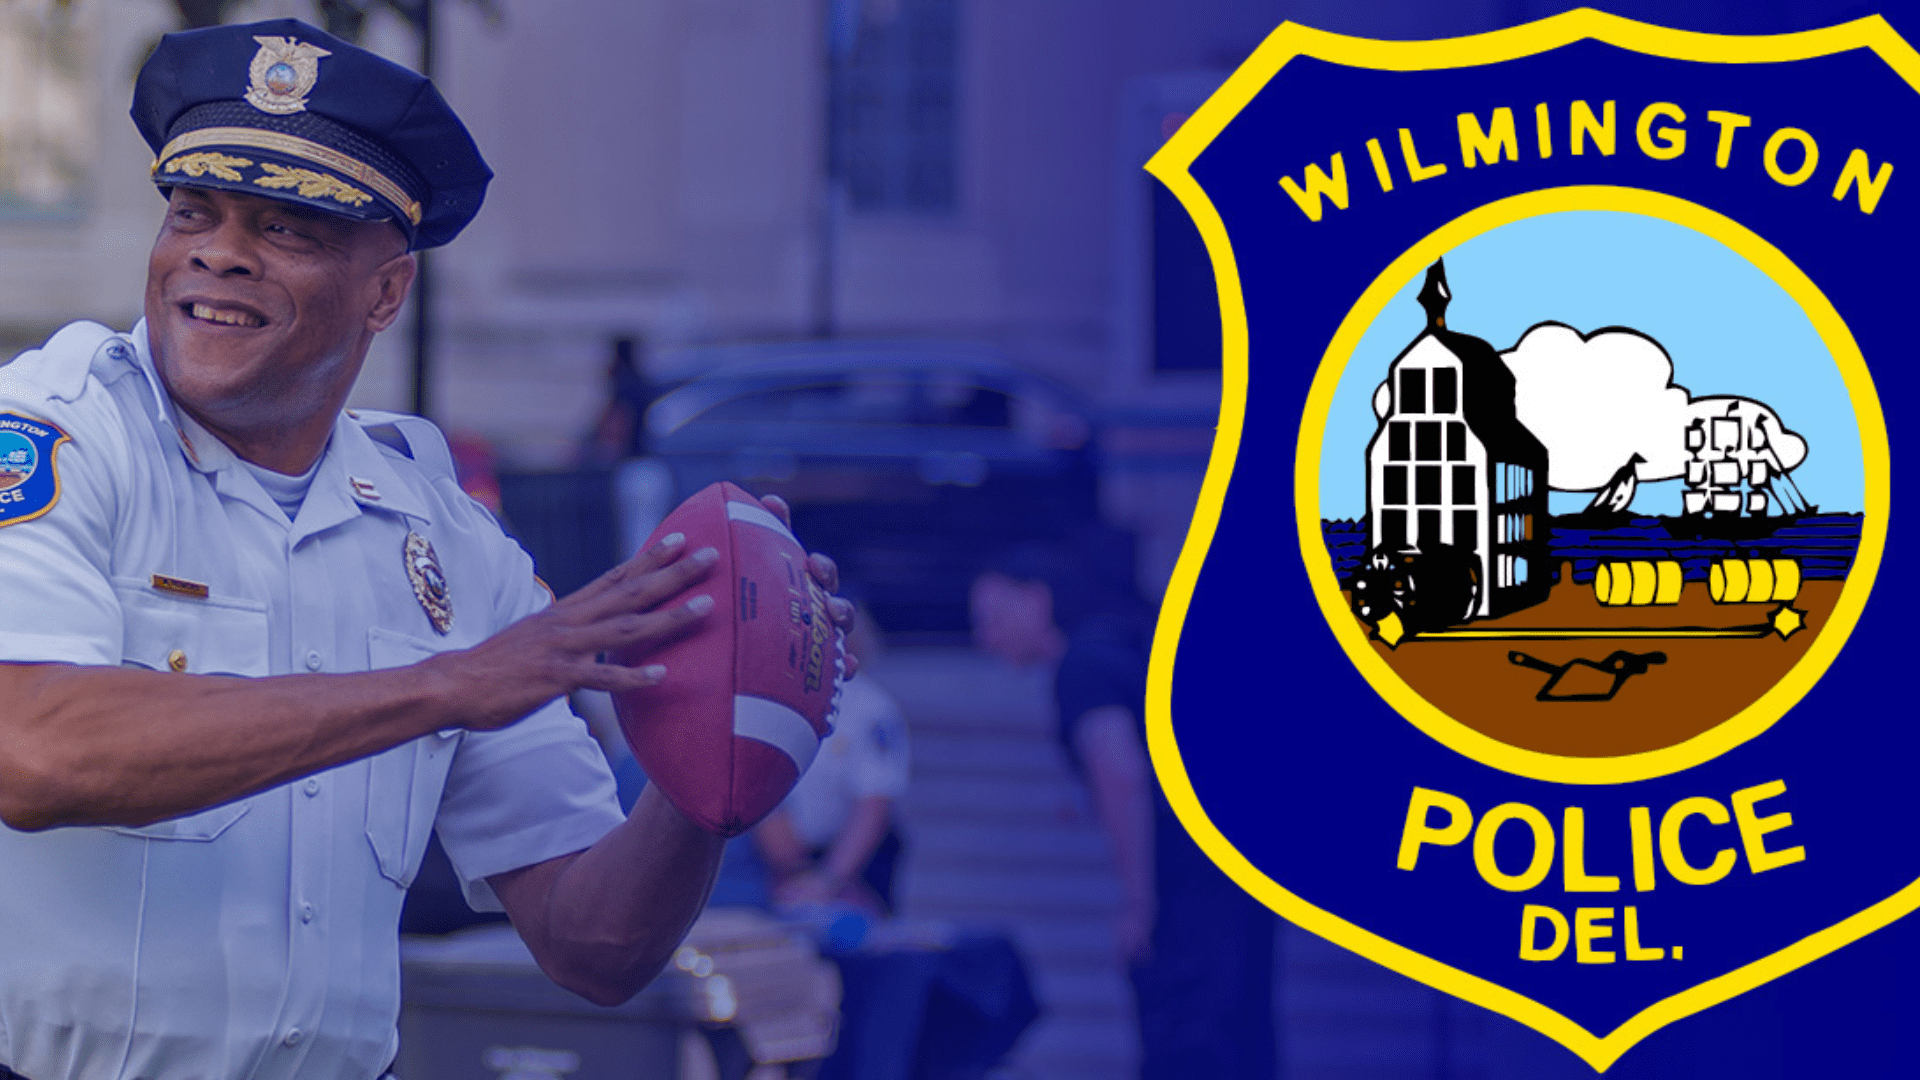 Featured image for “Wilmington PD hopes to unite police, community with 3 fairs”